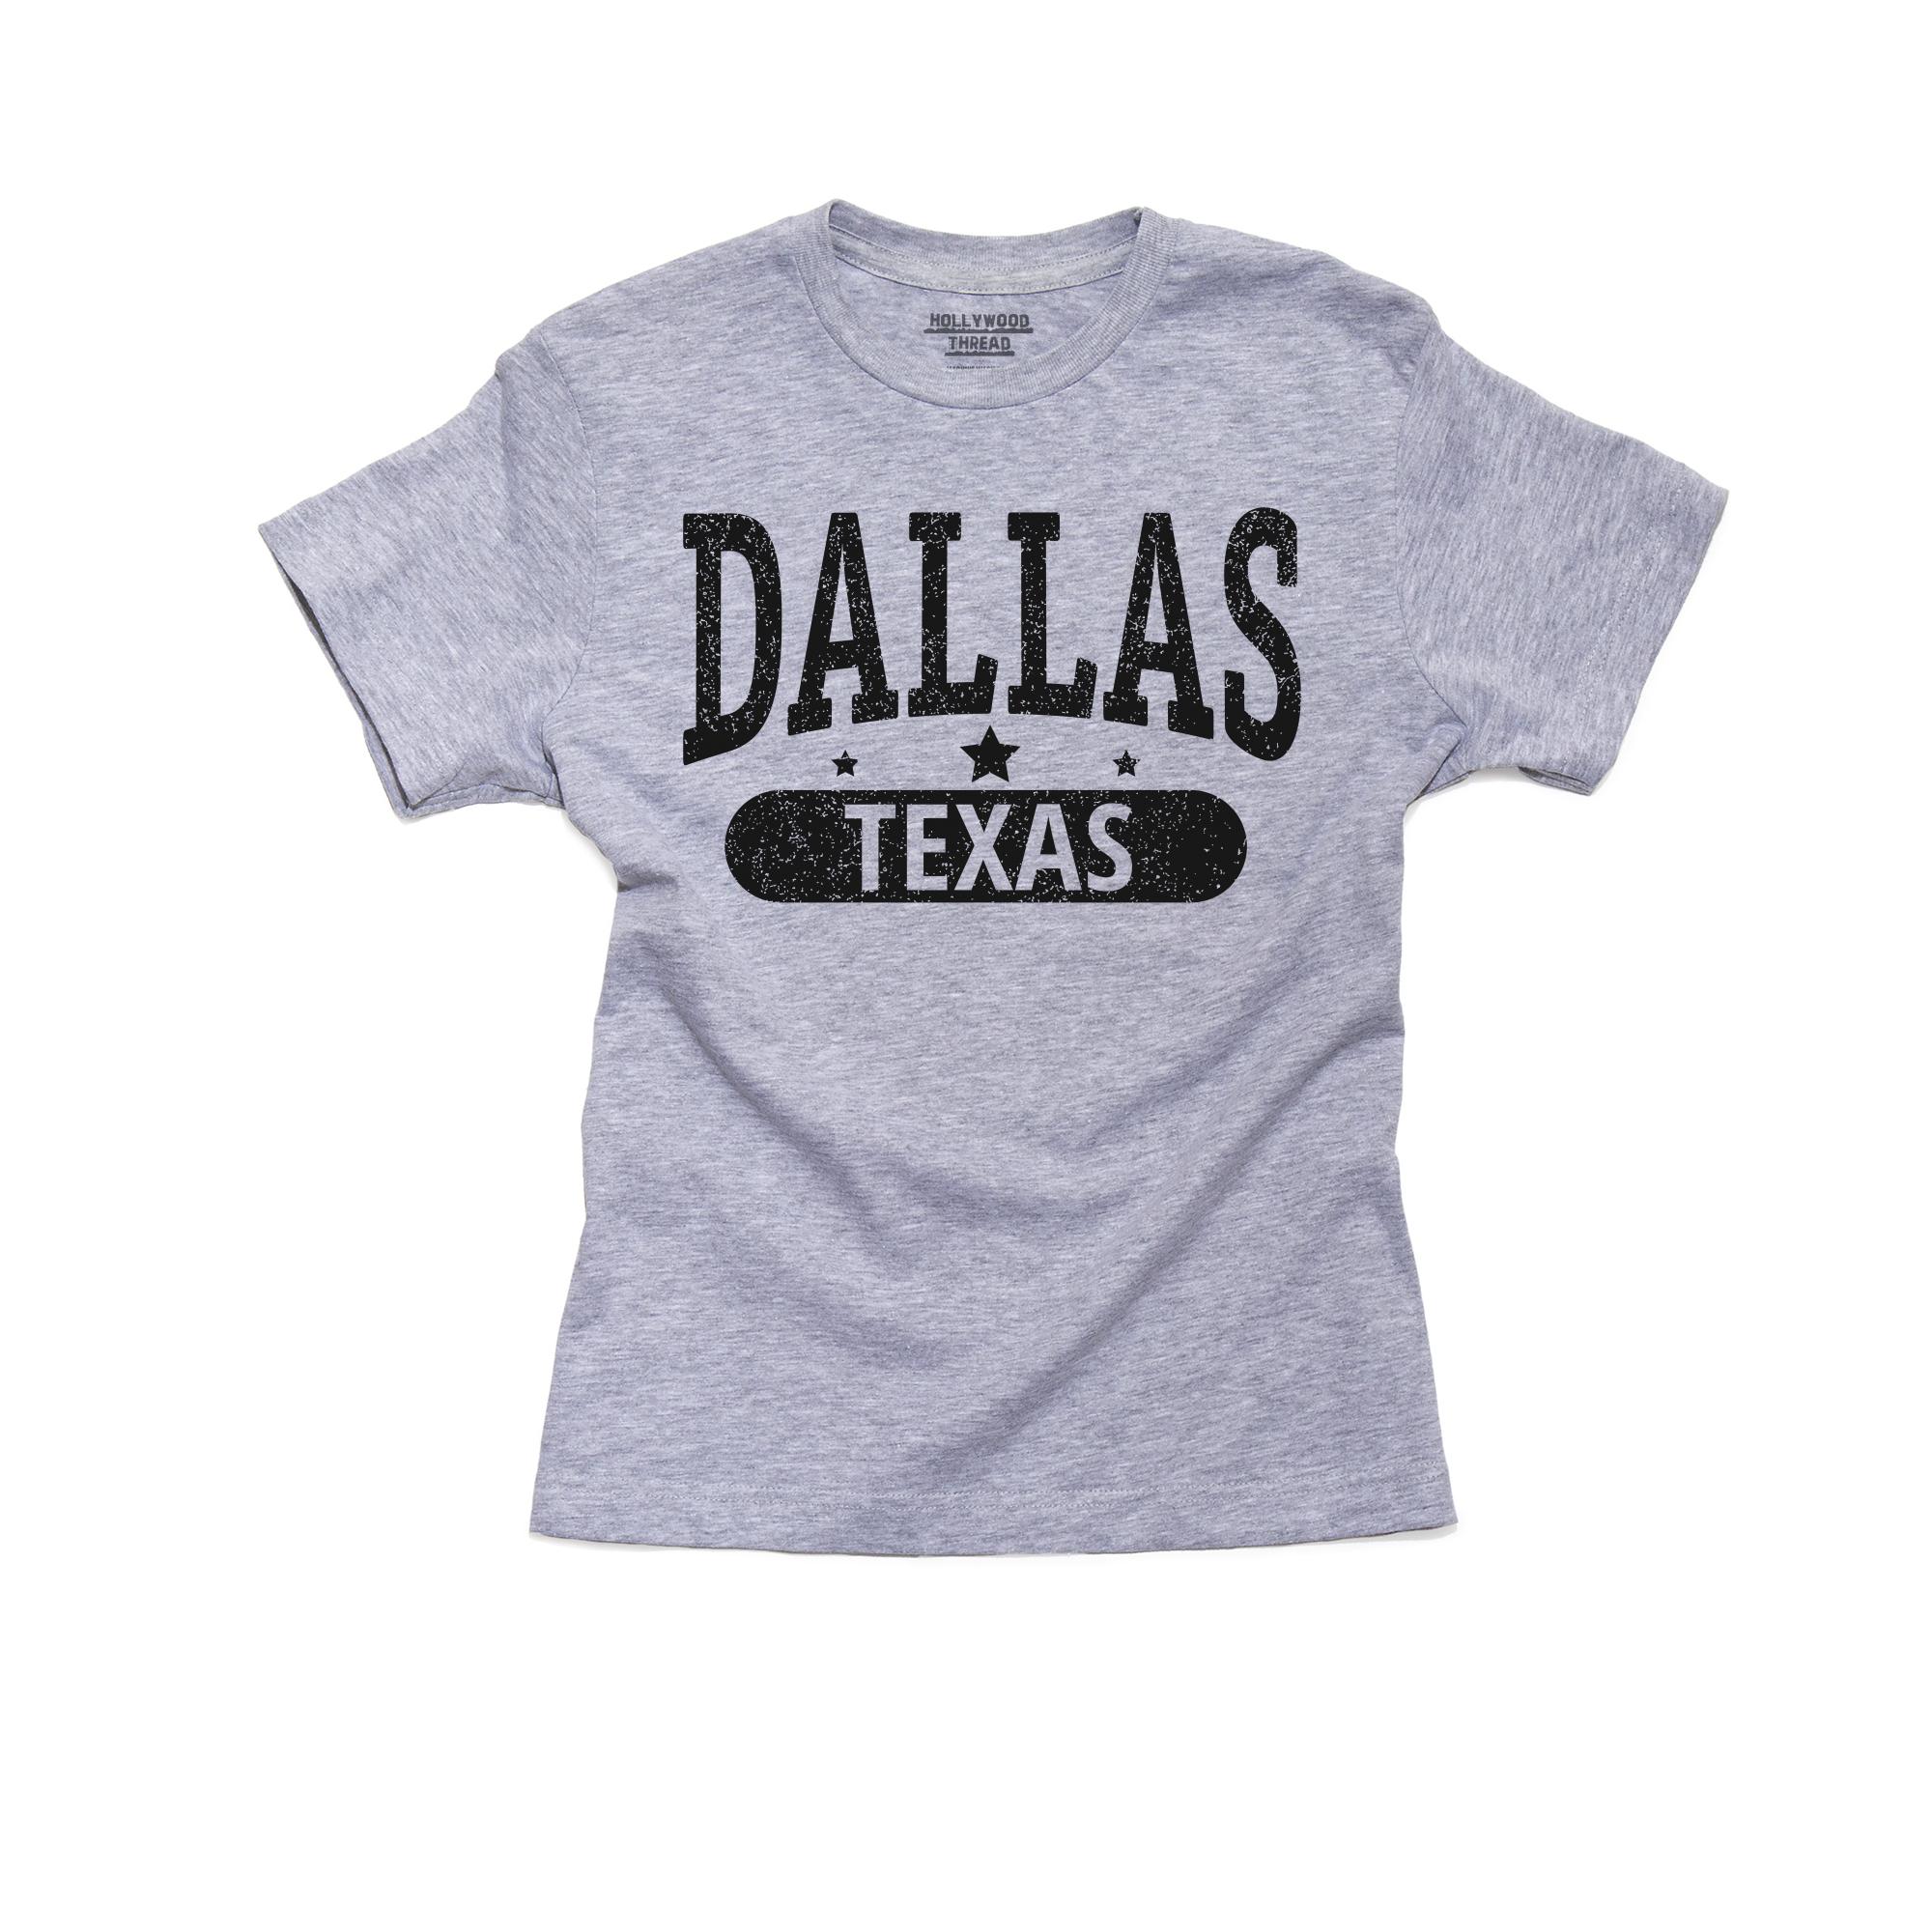 Trendy Dallas, Texas with Stars Boy's Cotton Youth Grey T-Shirt - image 1 of 2